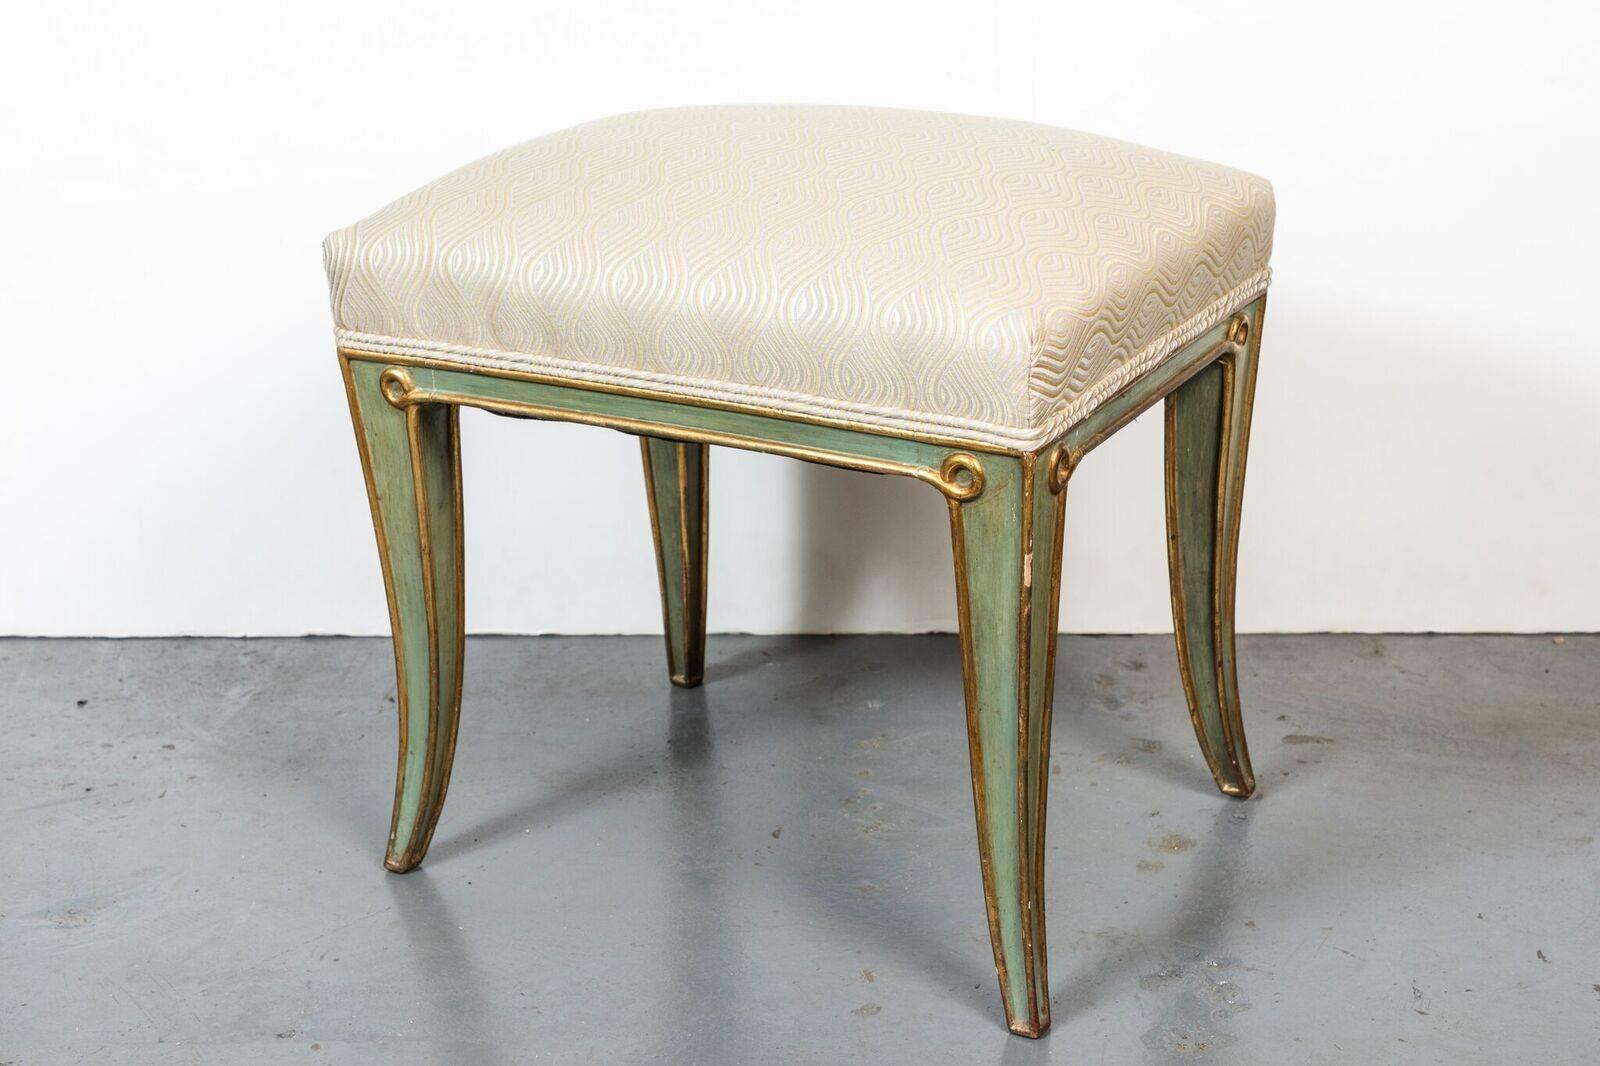 Early 20th Century Italian, Art Nouveau Period Benches For Sale